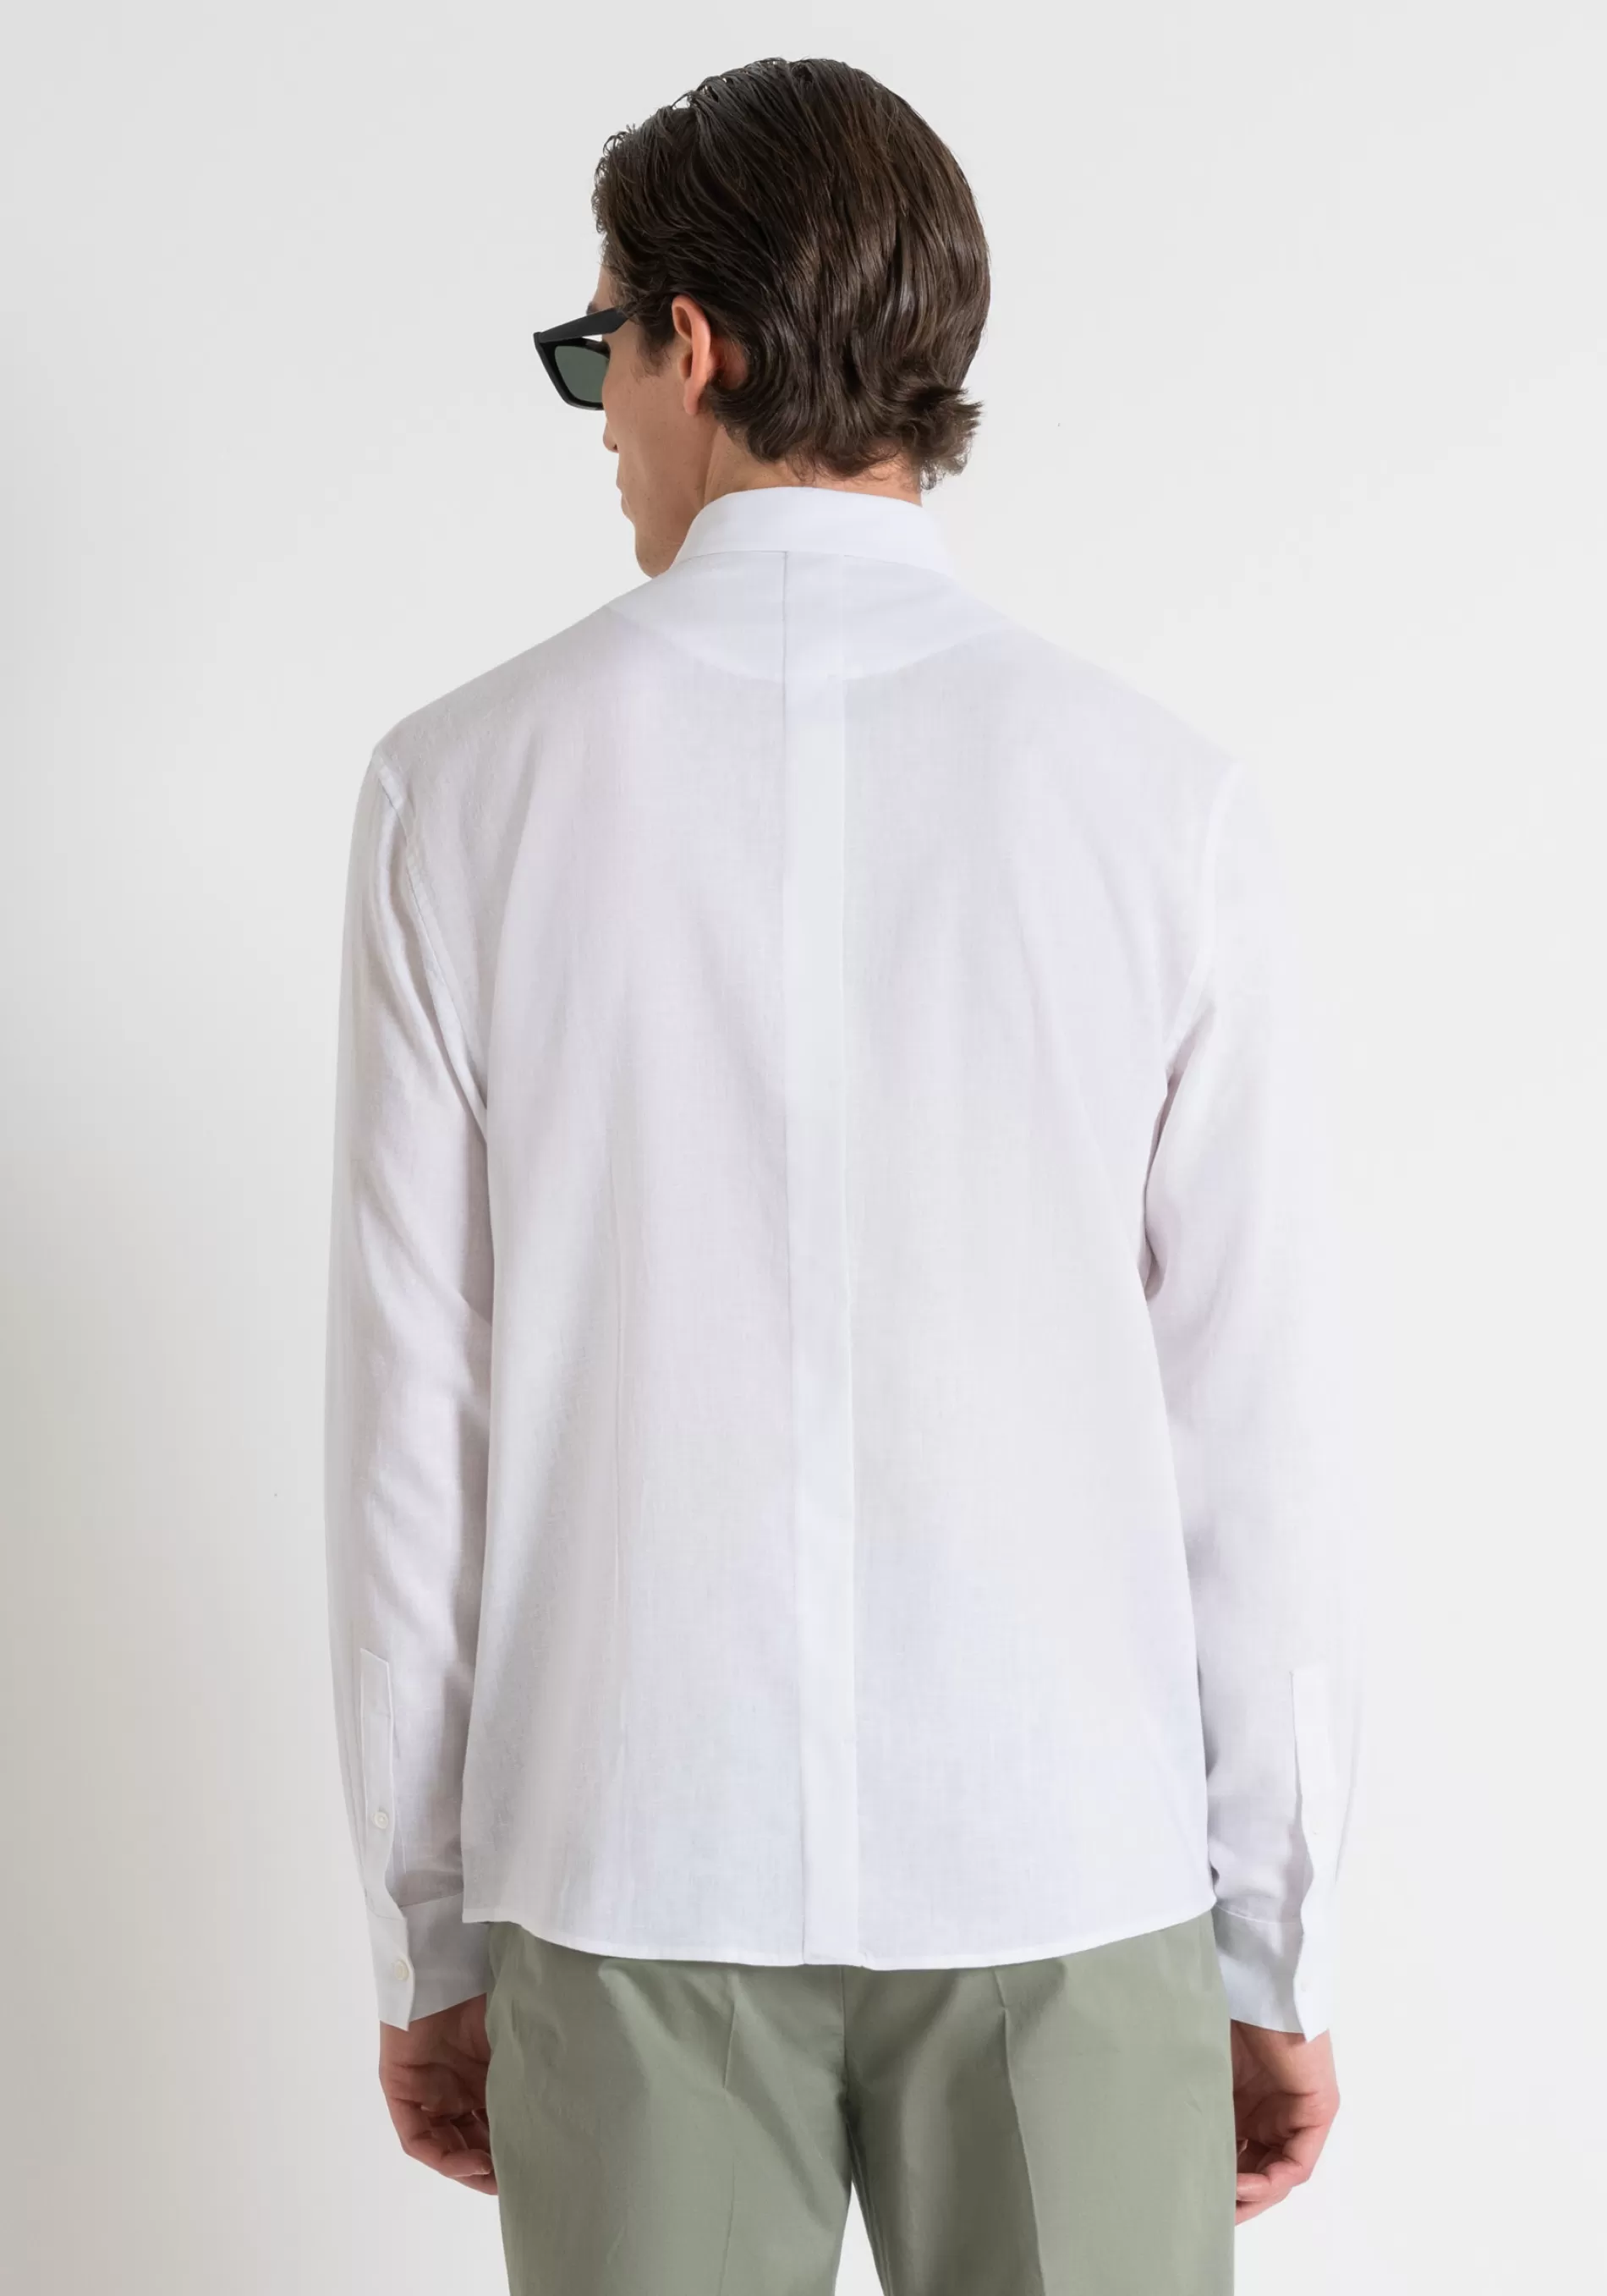 Clearance SMYRNA REGULAR FIT SHIRT IN LINEN VISCOSE WITH SOFT HAND Shirts